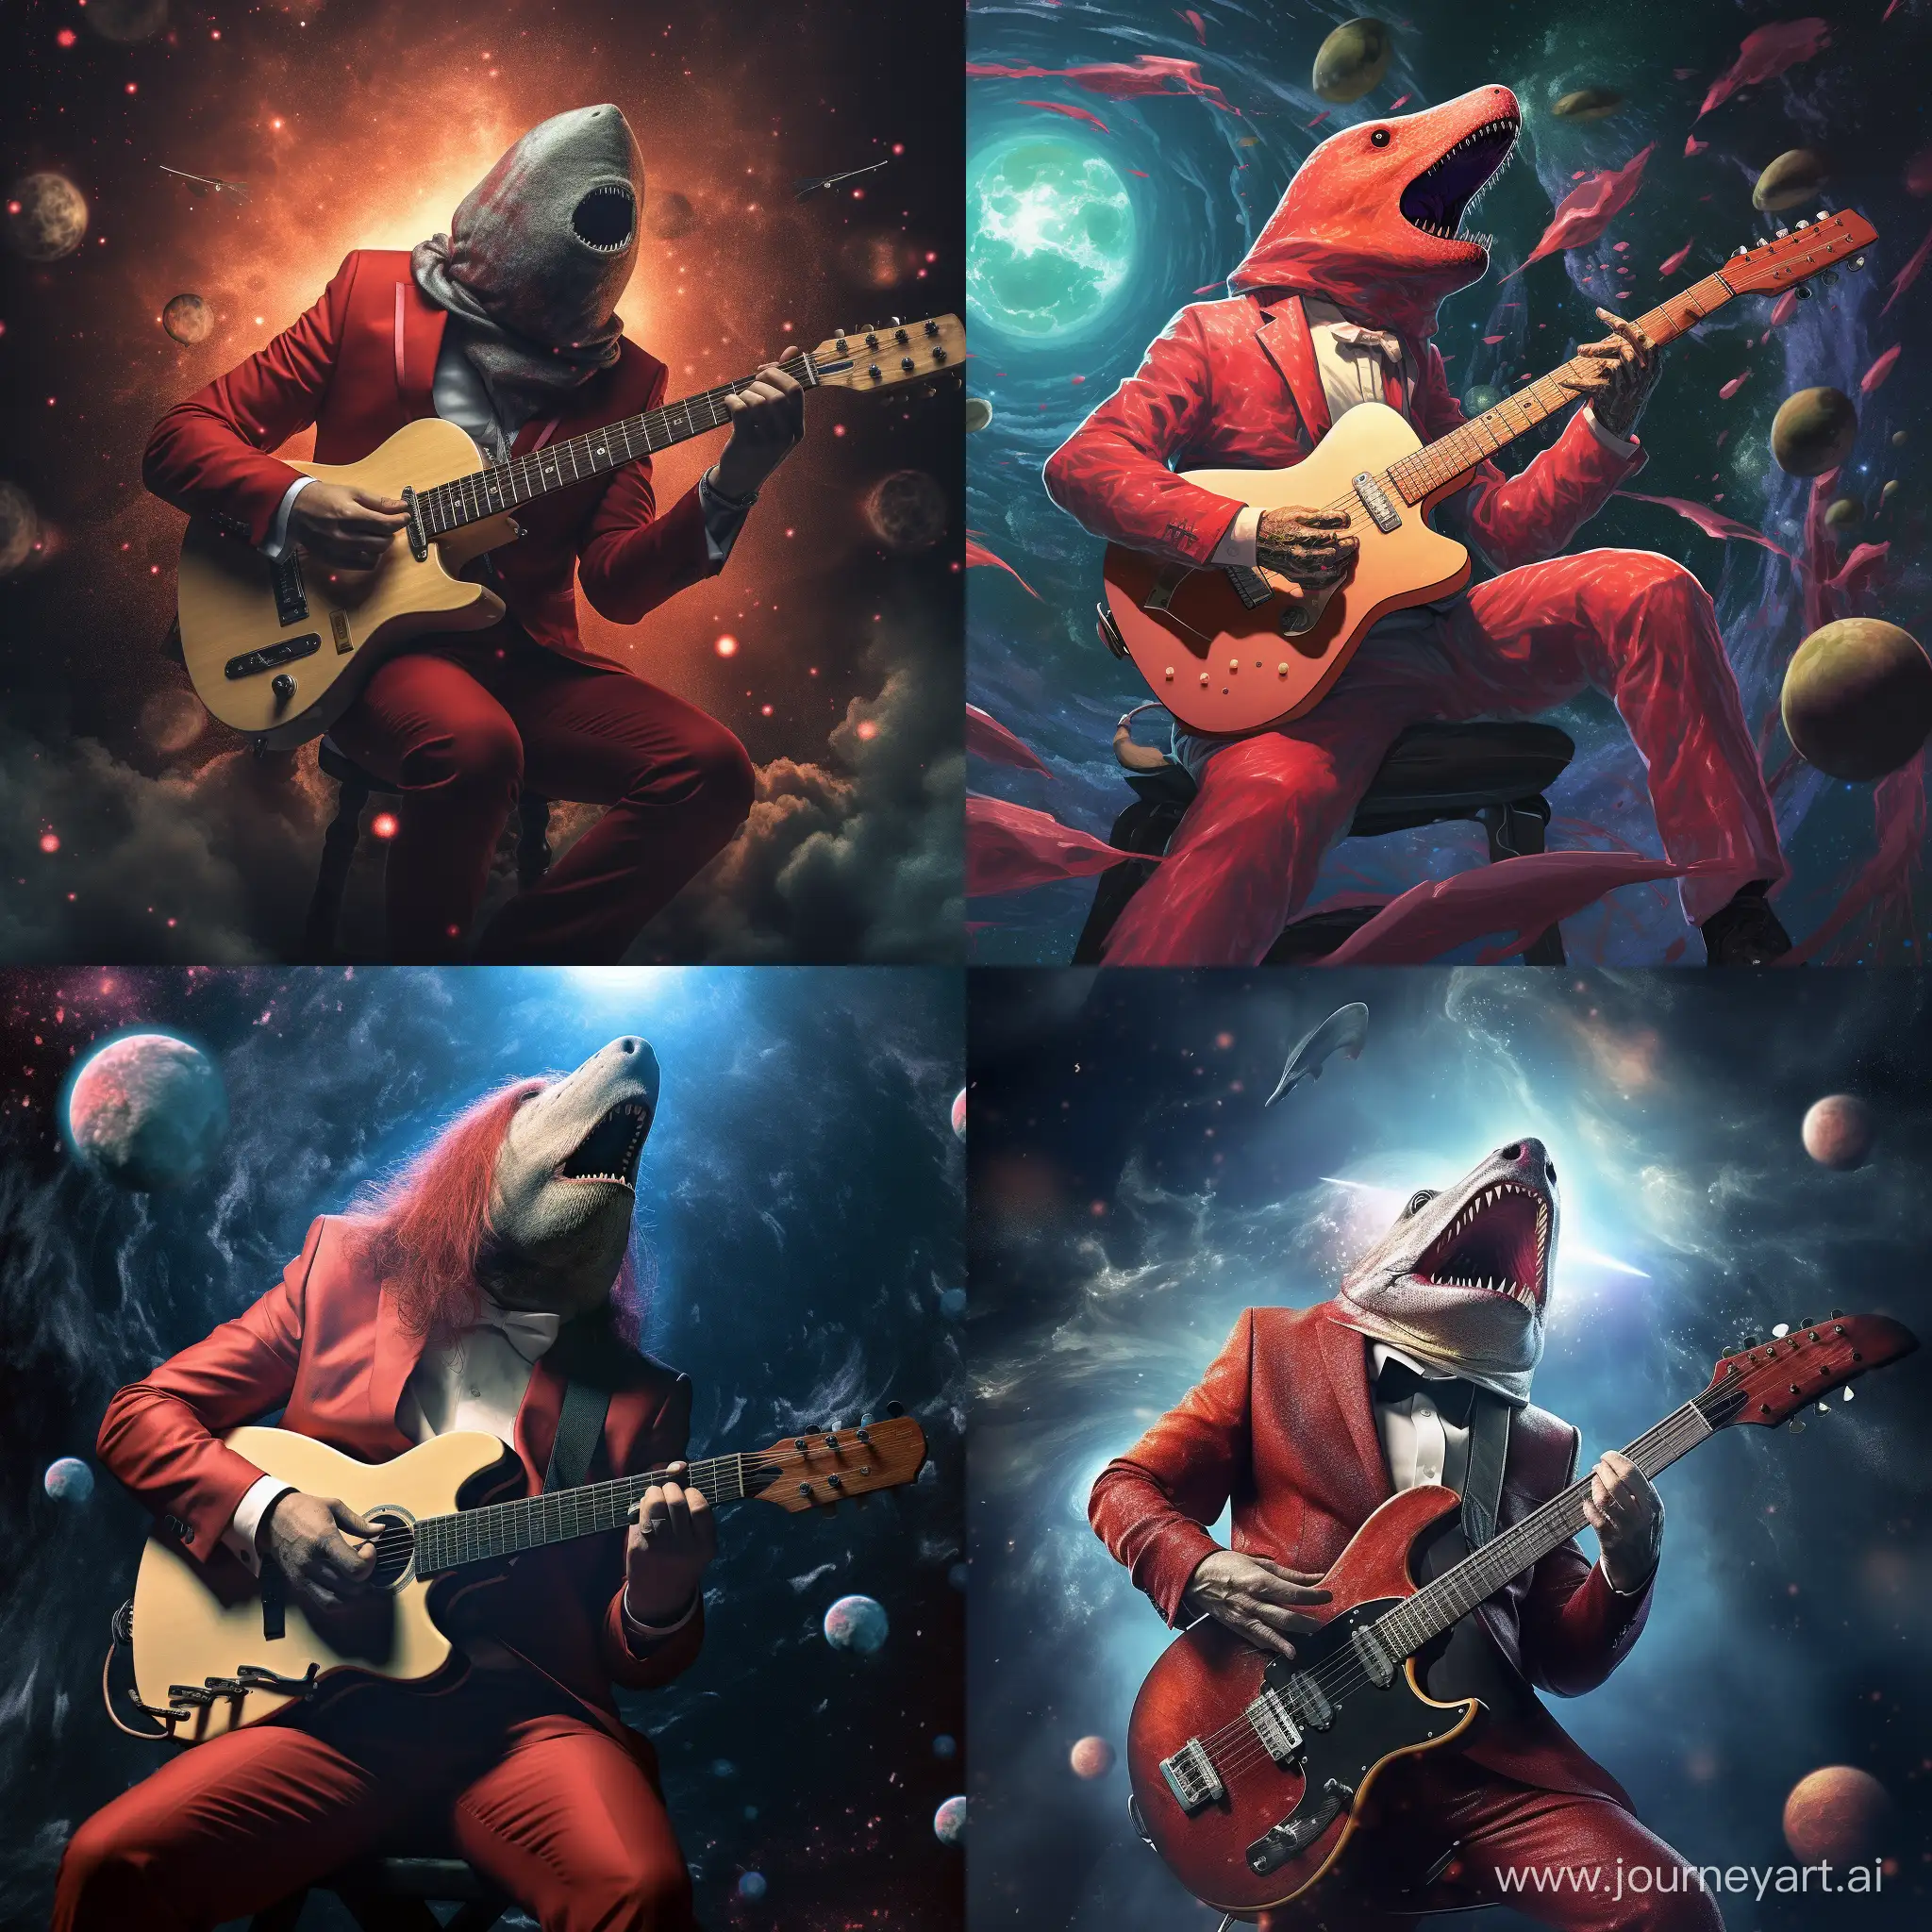 red shark in suit playing guitar in cosmos